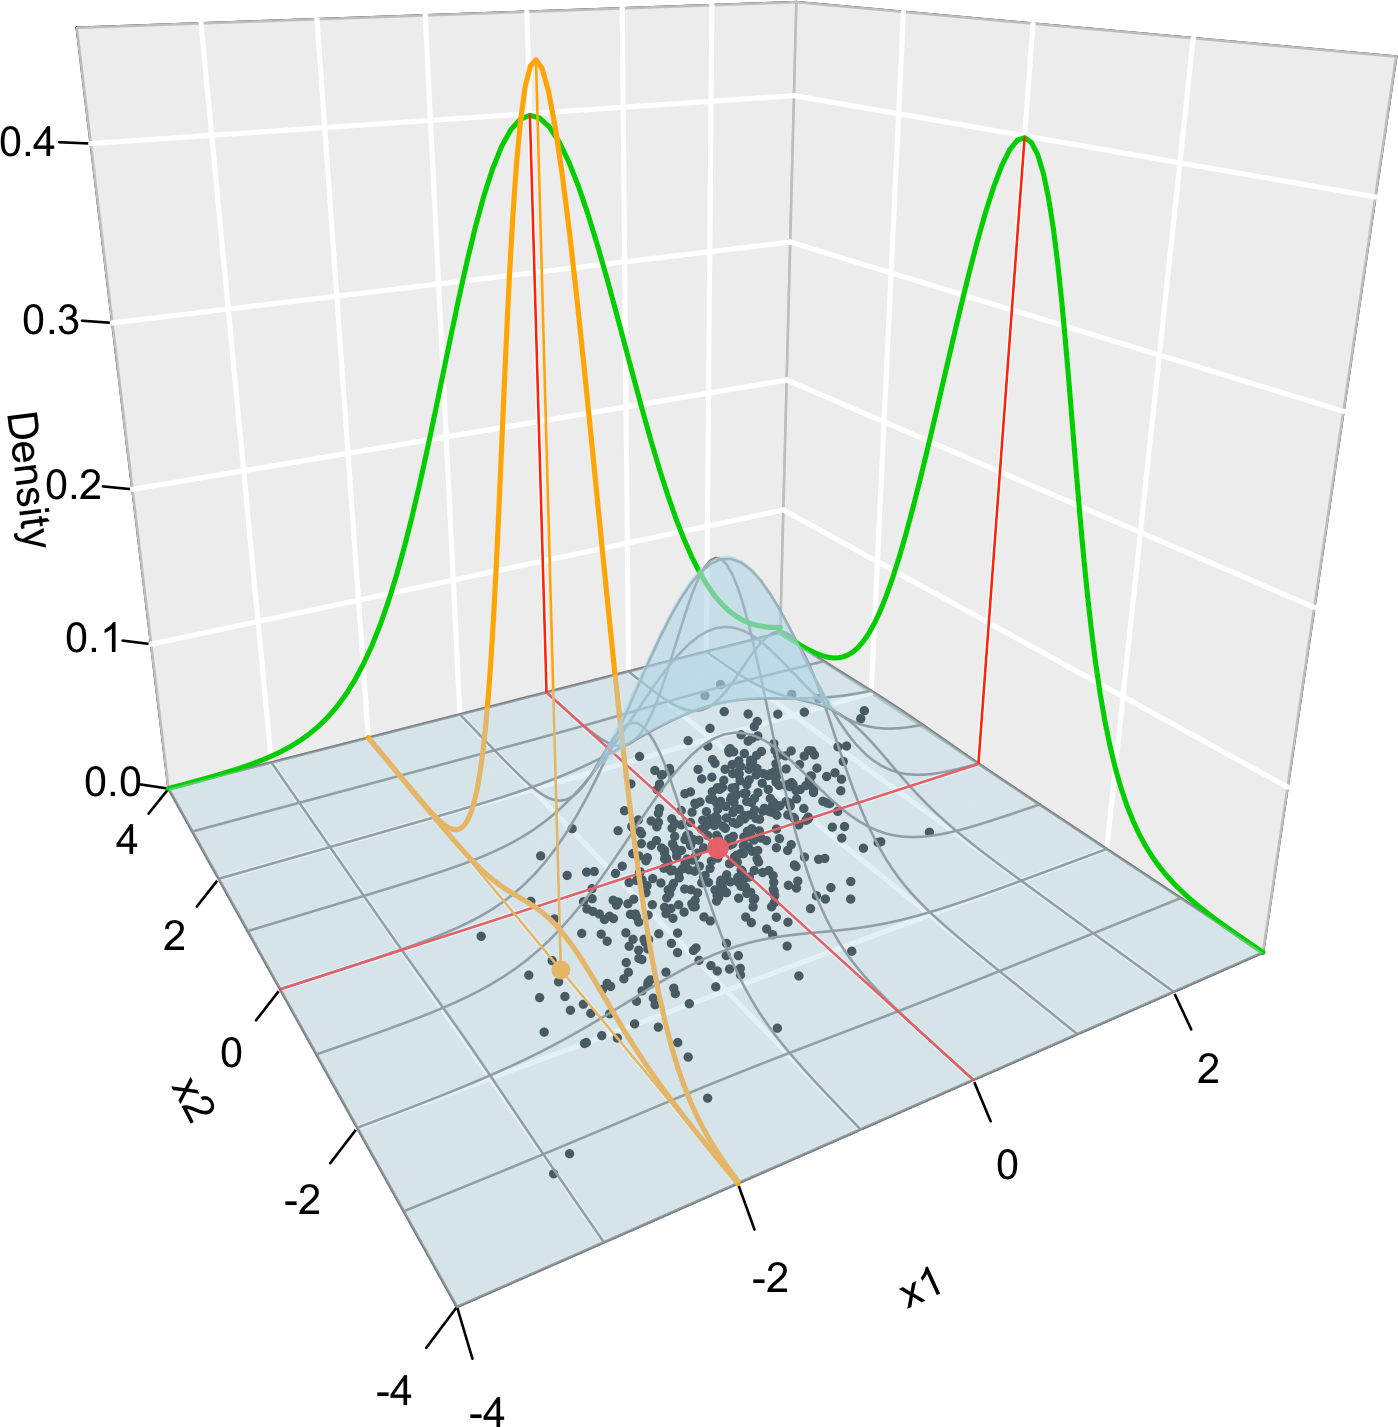 Visualization of the joint pdf (in blue), marginal pdfs (green), conditional pdf of \(X_2| X_1=x_1\) (orange), expectation (red point), and conditional expectation \(\mathbb{E}\lbrack X_2 | X_1=x_1 \rbrack\) (orange point) of a \(2\)-dimensional normal. The conditioning point of \(X_1\) is \(x_1=-2.\) Note the different scales of the densities, as they have to integrate one over different supports. Note how the conditional density (upper orange curve) is not the joint pdf \(f(x_1,x_2)\) (lower orange curve) with \(x_1=-2\) but a rescaling of this curve by \(\frac{1}{f_{X_1}(x_1)}.\) The parameters of the \(2\)-dimensional normal are \(\mu_1=\mu_2=0,\) \(\sigma_1=\sigma_2=1\) and \(\rho=0.75.\) \(500\) observations sampled from the distribution are shown in black.